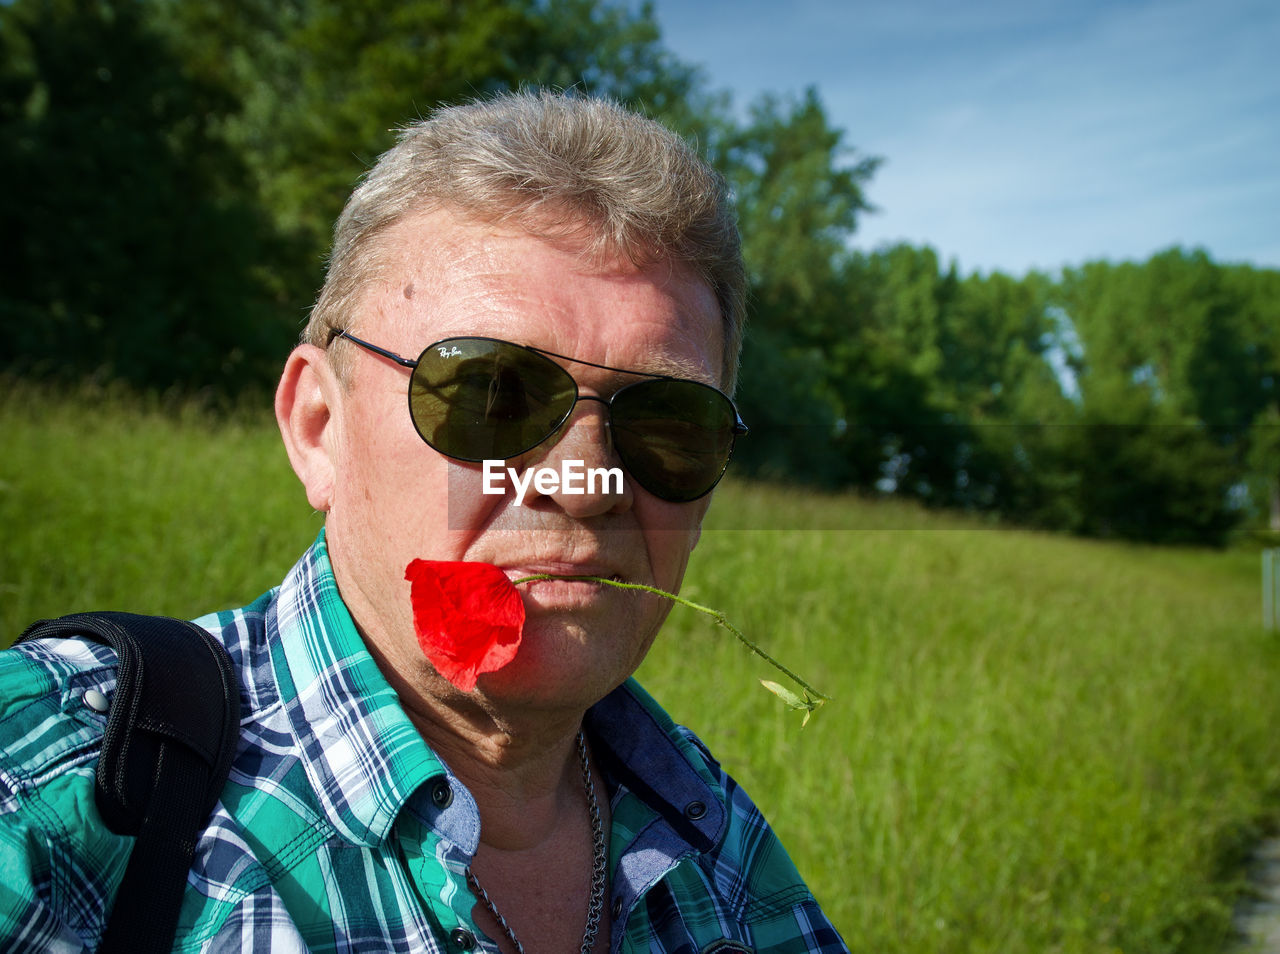 Portrait of man wearing sunglasses while holding flower in mouth